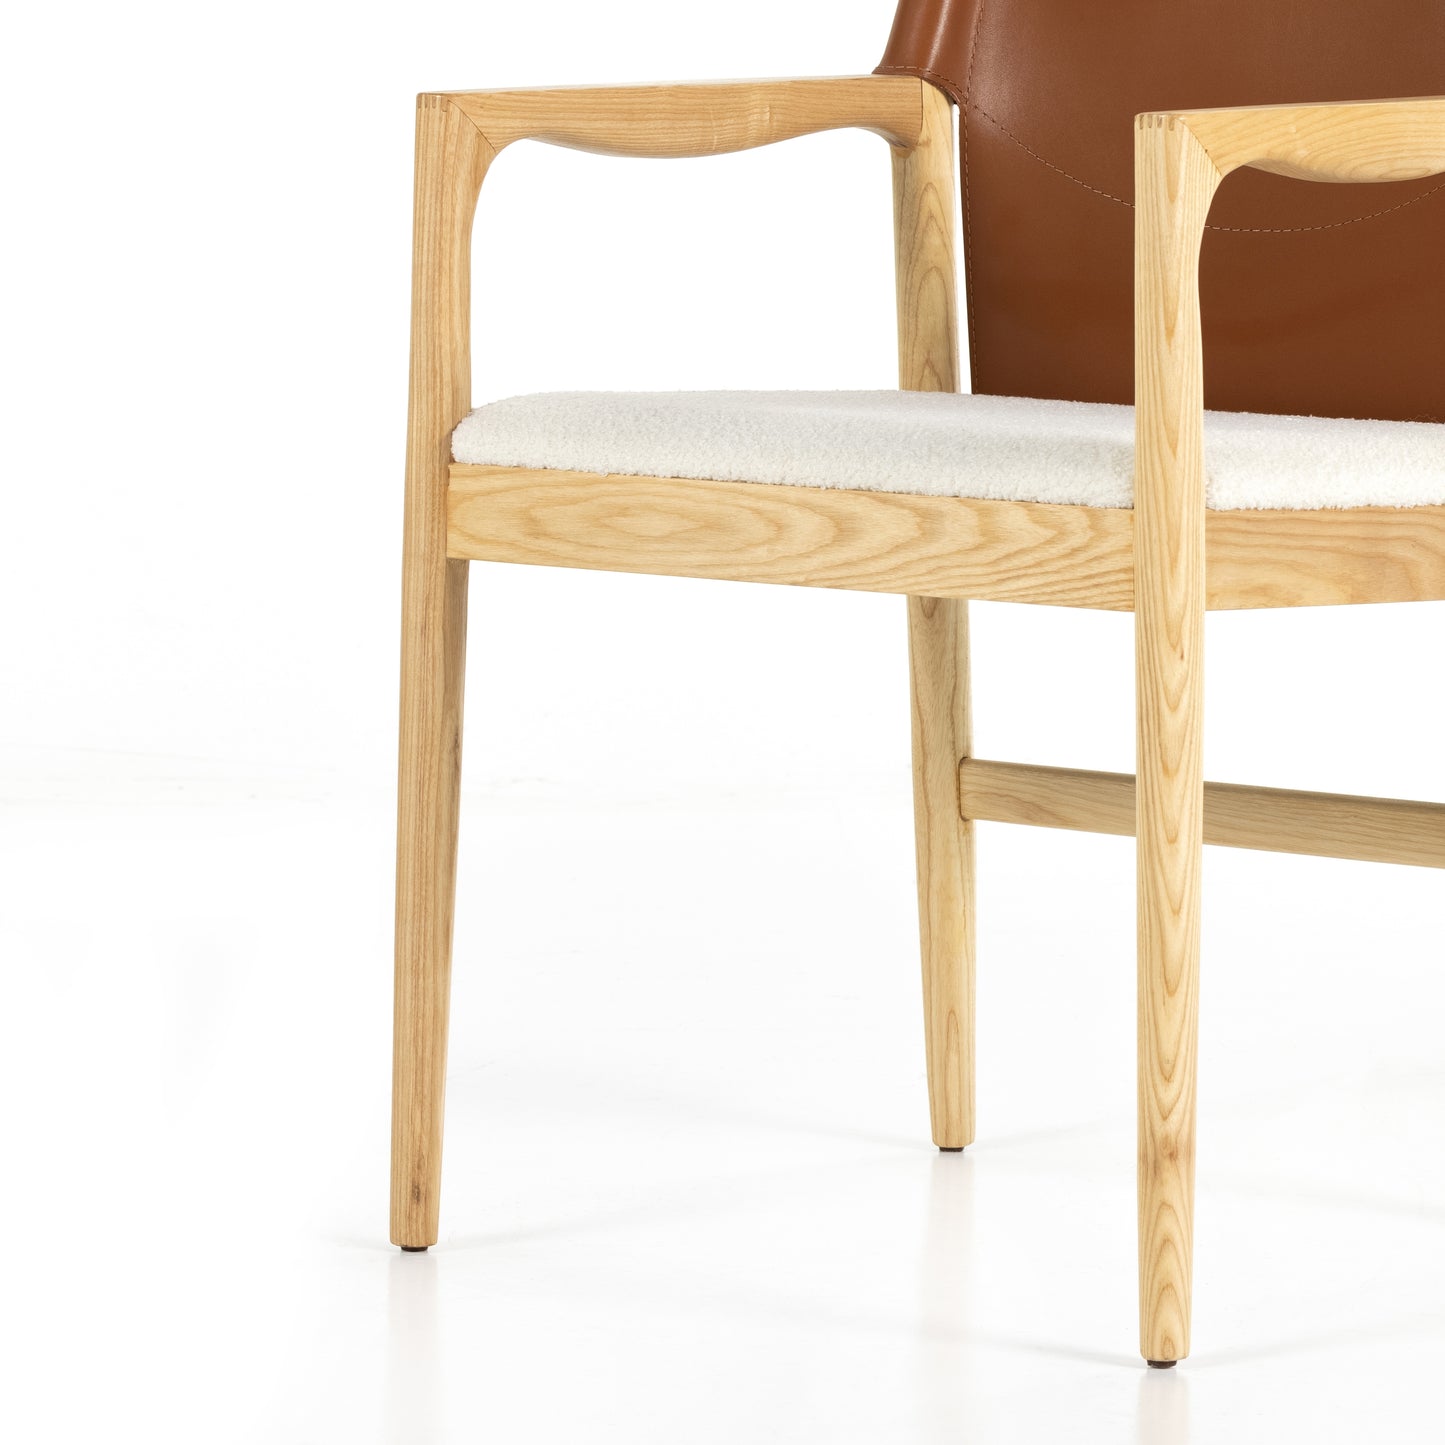 Load image into Gallery viewer, Lulu Dining Chair-Saddle Leather Blends Dining Chair Four Hands     Four Hands, Burke Decor, Mid Century Modern Furniture, Old Bones Furniture Company, Old Bones Co, Modern Mid Century, Designer Furniture, https://www.oldbonesco.com/
